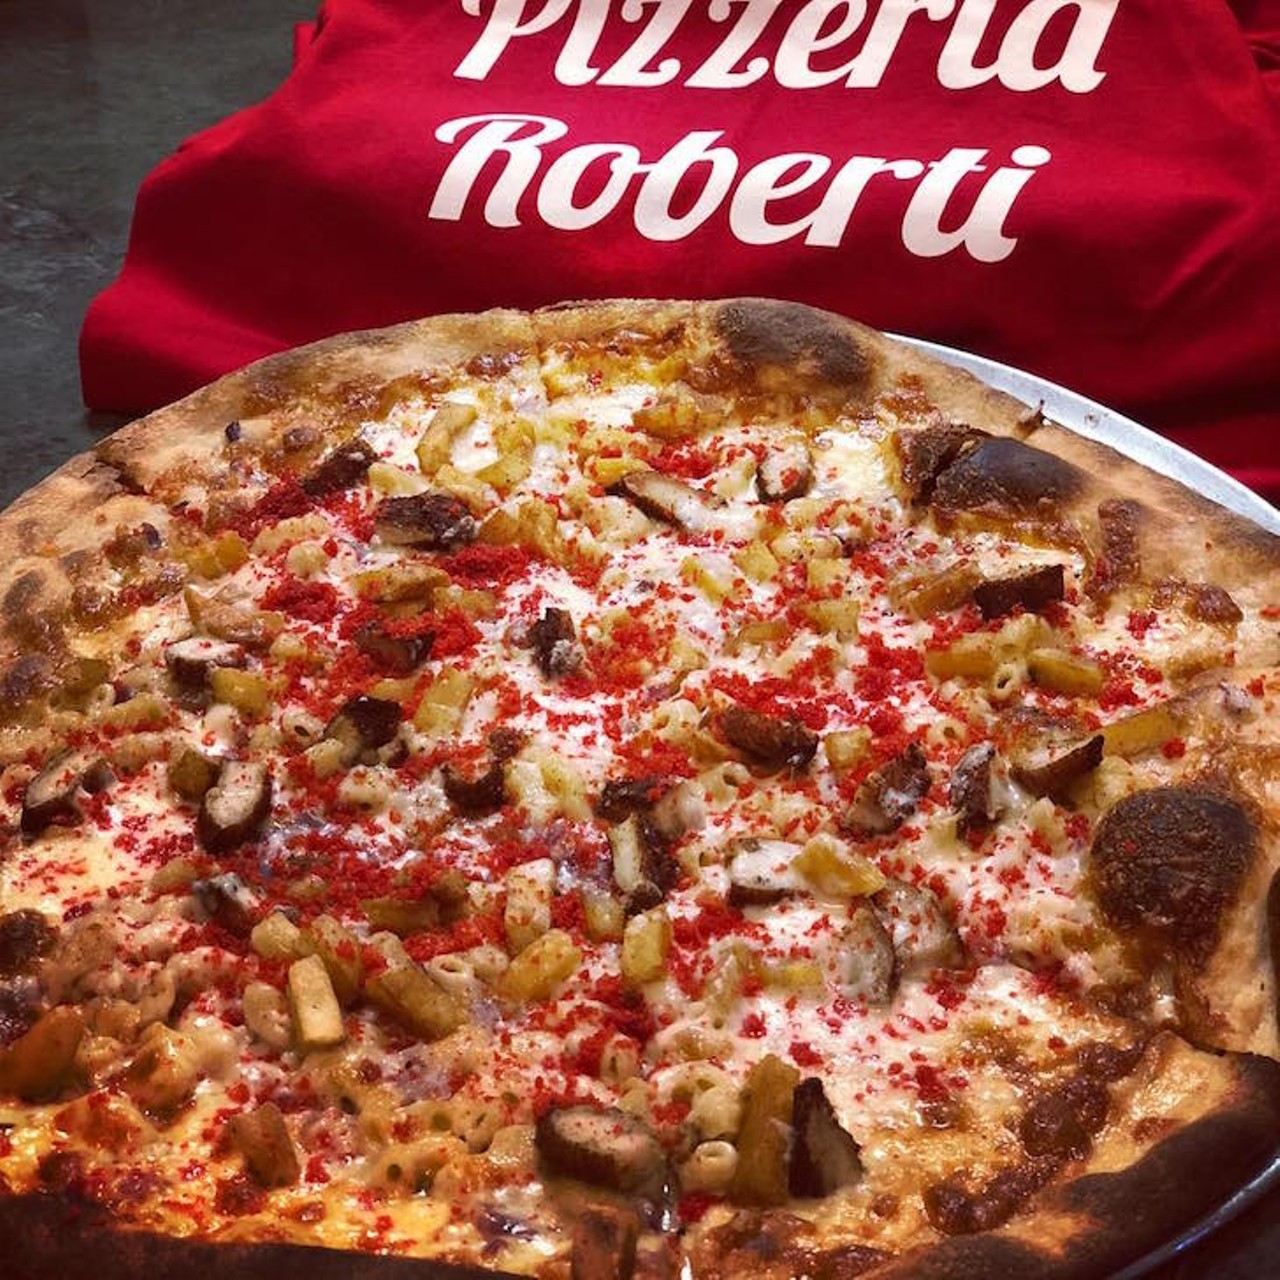 Pizzeria Roberti
2751 S. Chickasaw Trail, #107, Orlando (407) 634-0041
Joe Roberti of Pizzeria Roberti is determined to serve you pies that are out of this world, unless it&#146;s Sunday or Monday (they&#146;re closed). It&#146;s up to the customer&#151;build your own pizza and let the flavors wash over you with every bite, whether it&#146;s a personal gluten-free or a large to share. Pick between a simple one-topping, or go crazy with unlimited topping options for an additional price. Bonus: you can add shrimp for $4.
Photo via pizzeriaroberti/Instagram